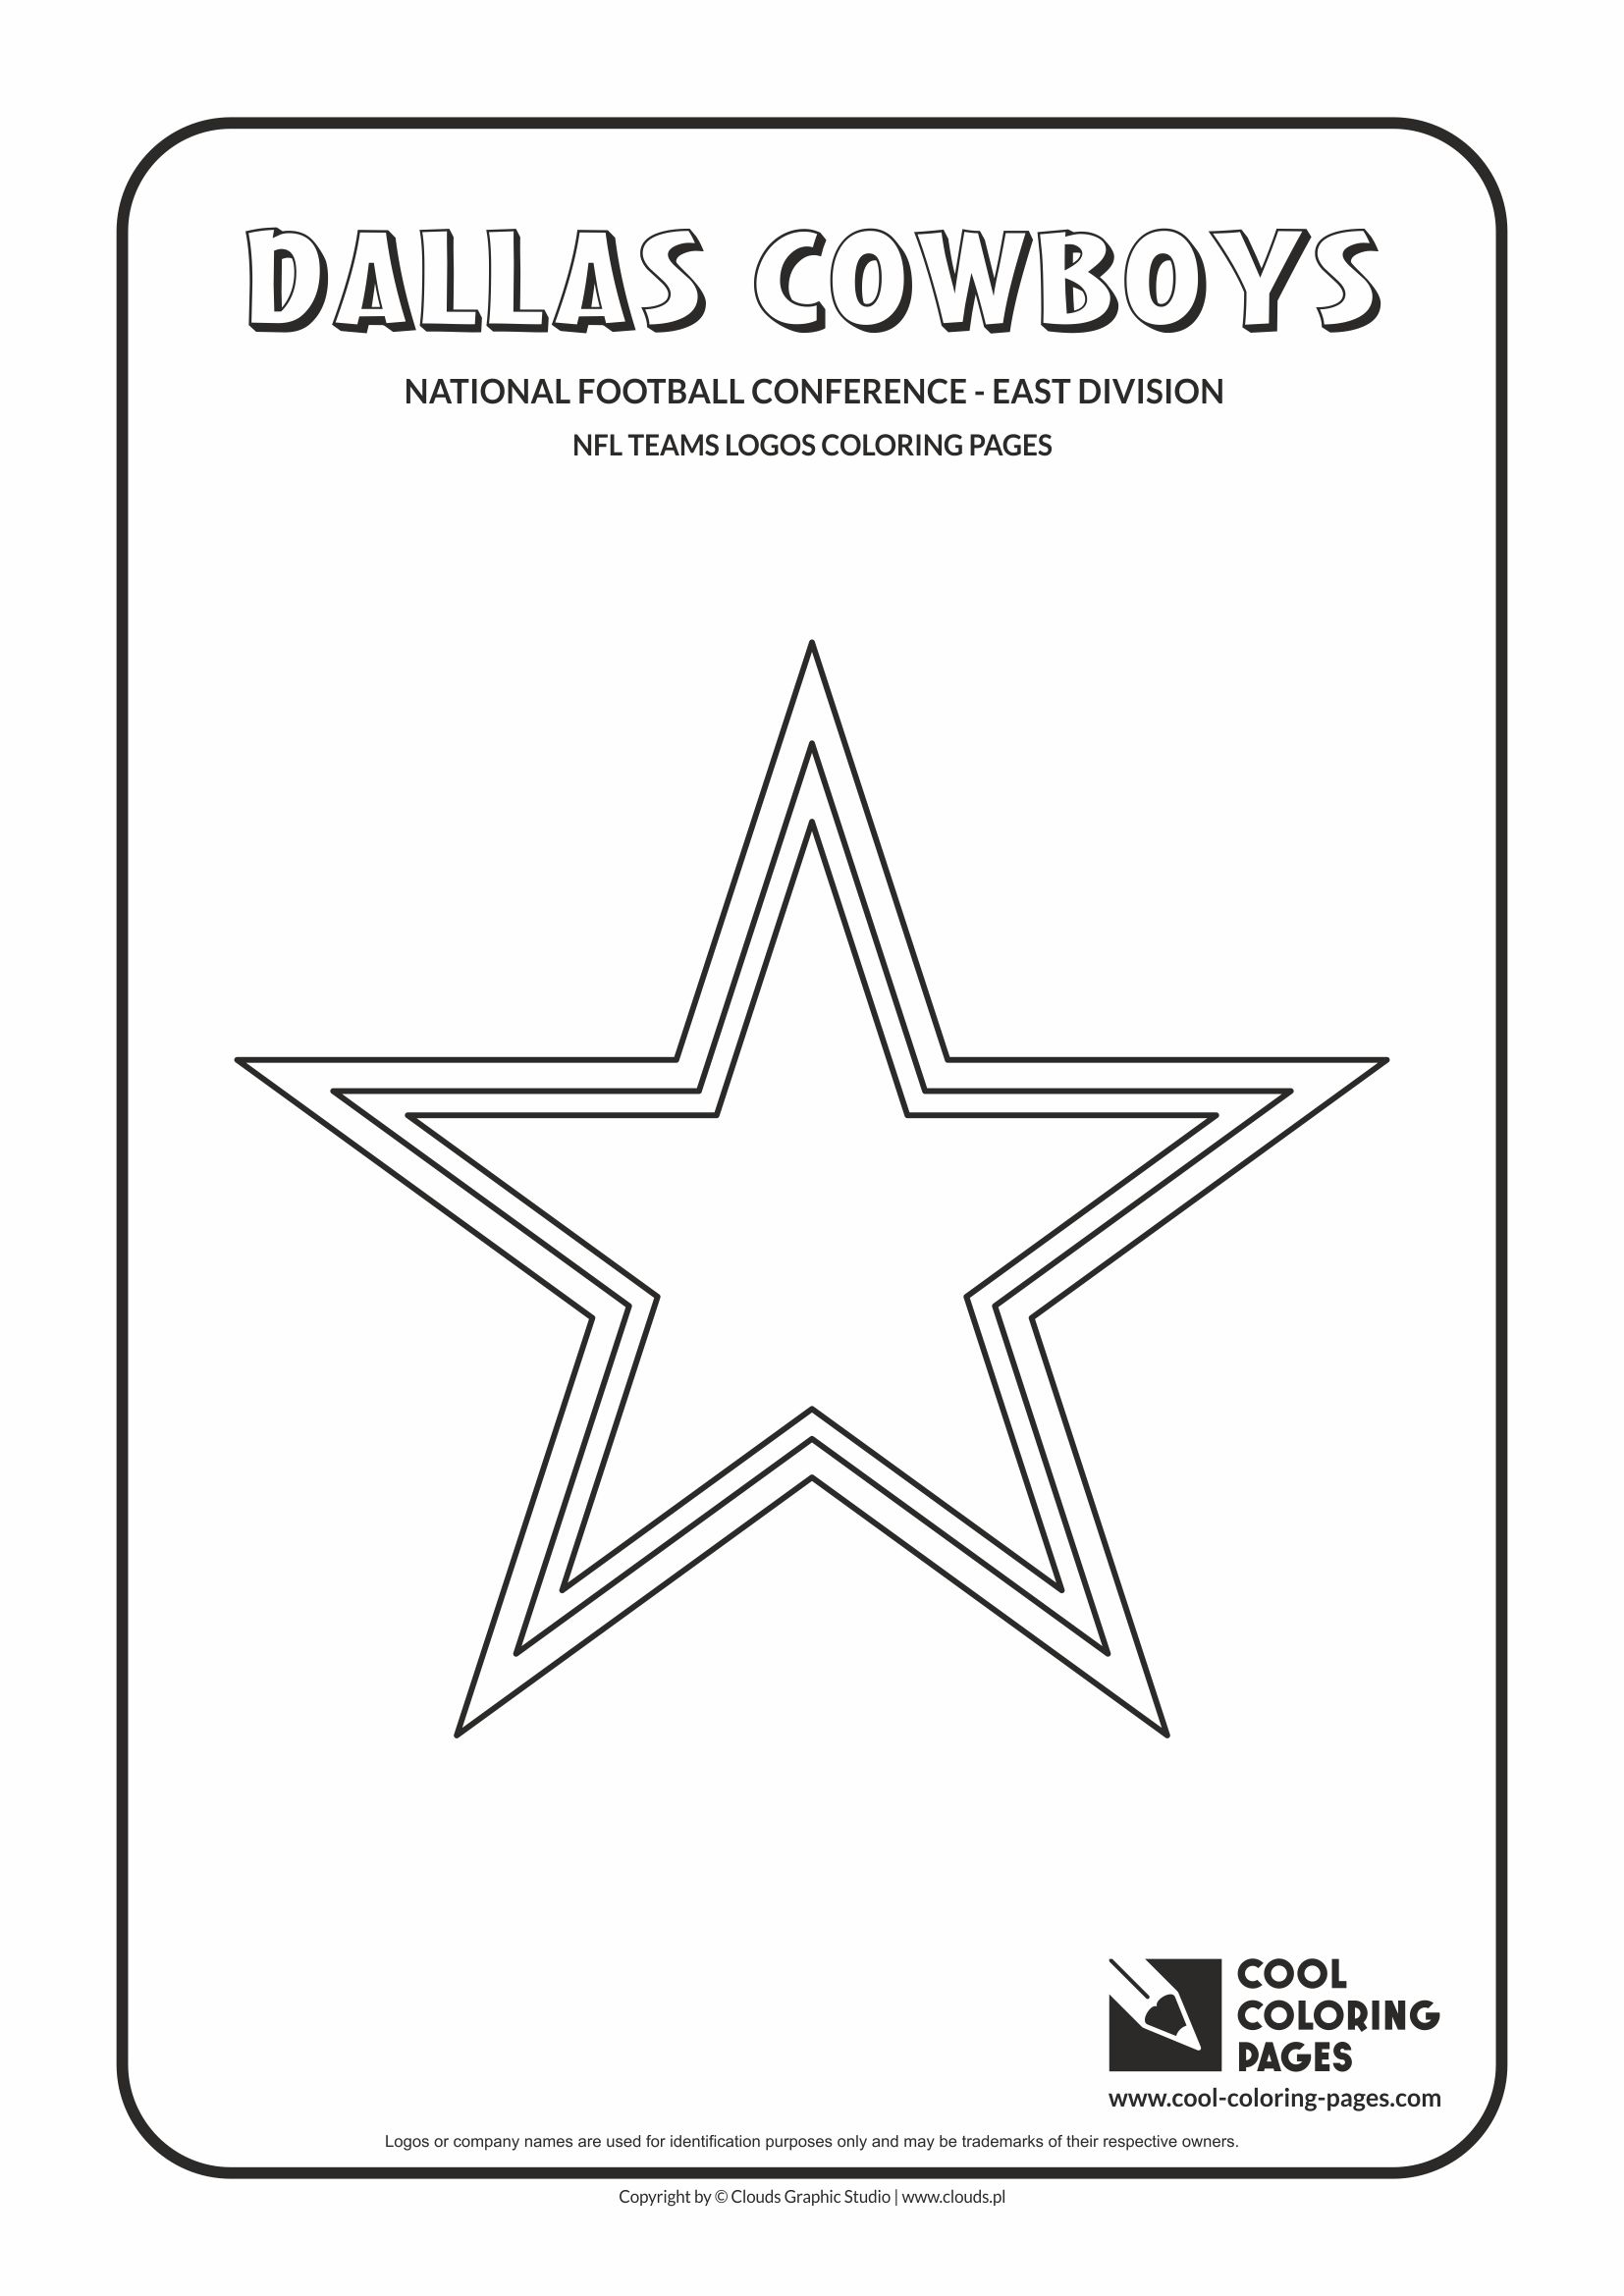 Cool Coloring Pages - NFL American Football Clubs Logos - National Football Conference - East Division / Dallas Cowboys logo / Coloring page with Dallas Cowboys logo